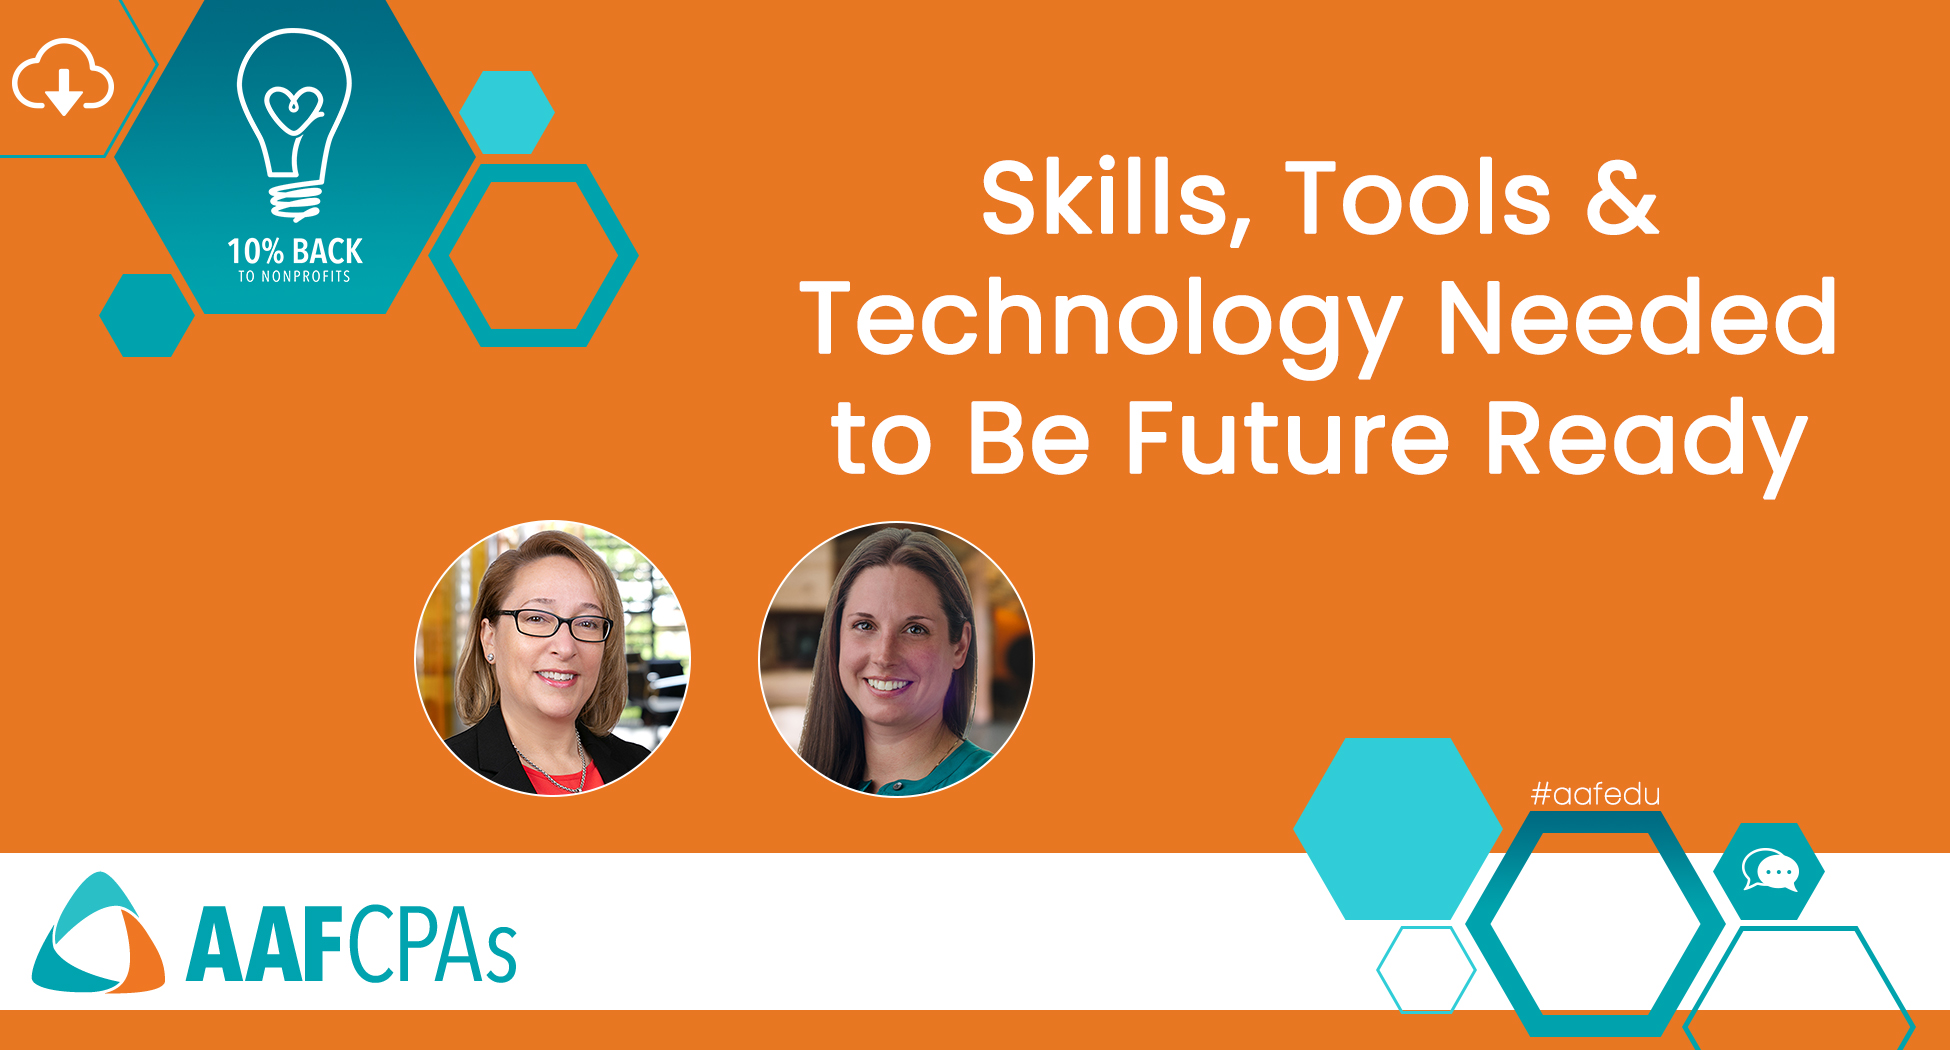 The Skills, Tools & Technology Needed Now to Be Future Ready